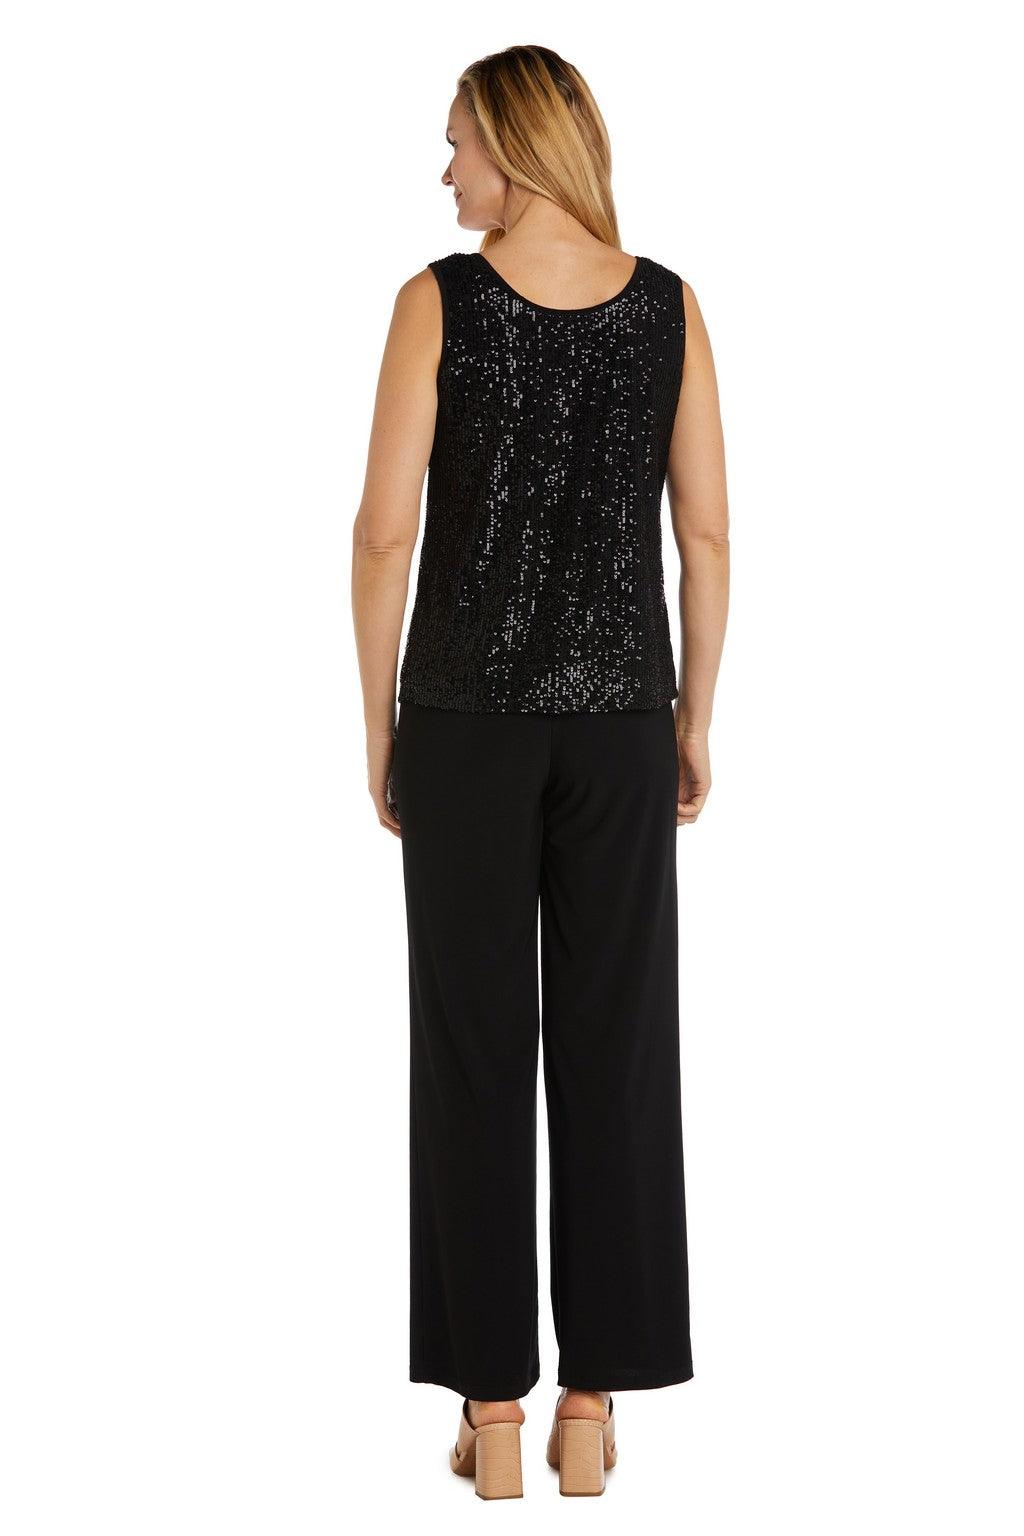 R&M Richards 2756 Long Formal Sequined Pant Suit – The Dress Outlet